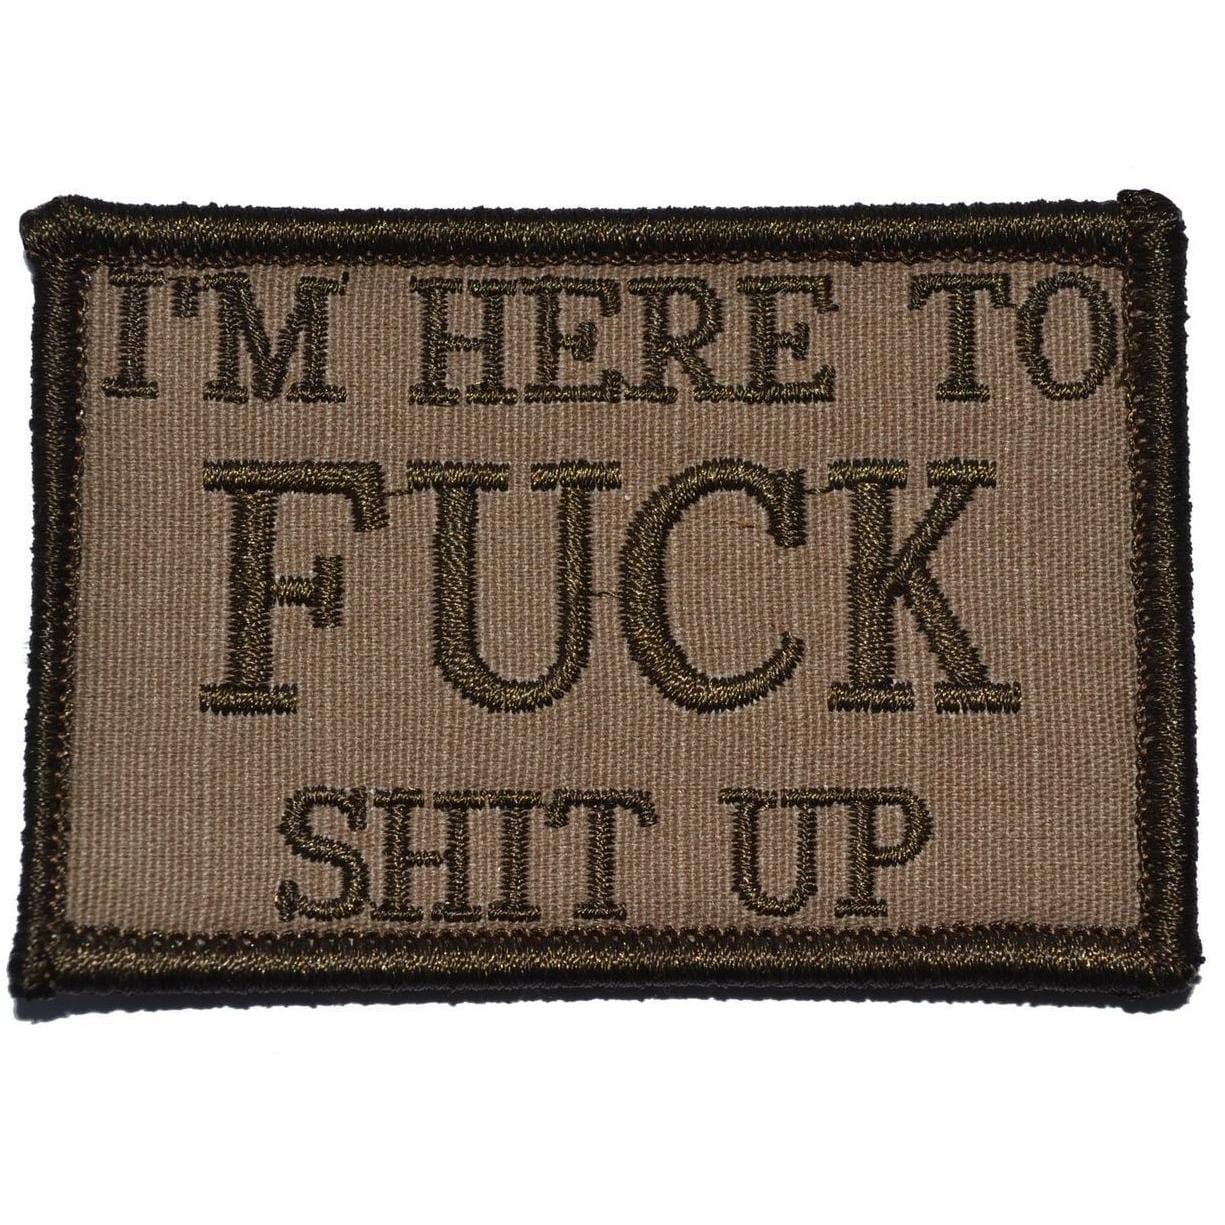 Tactical Gear Junkie Patches Coyote Brown I'm Here to Fuck Shit Up - 2x3 Patch